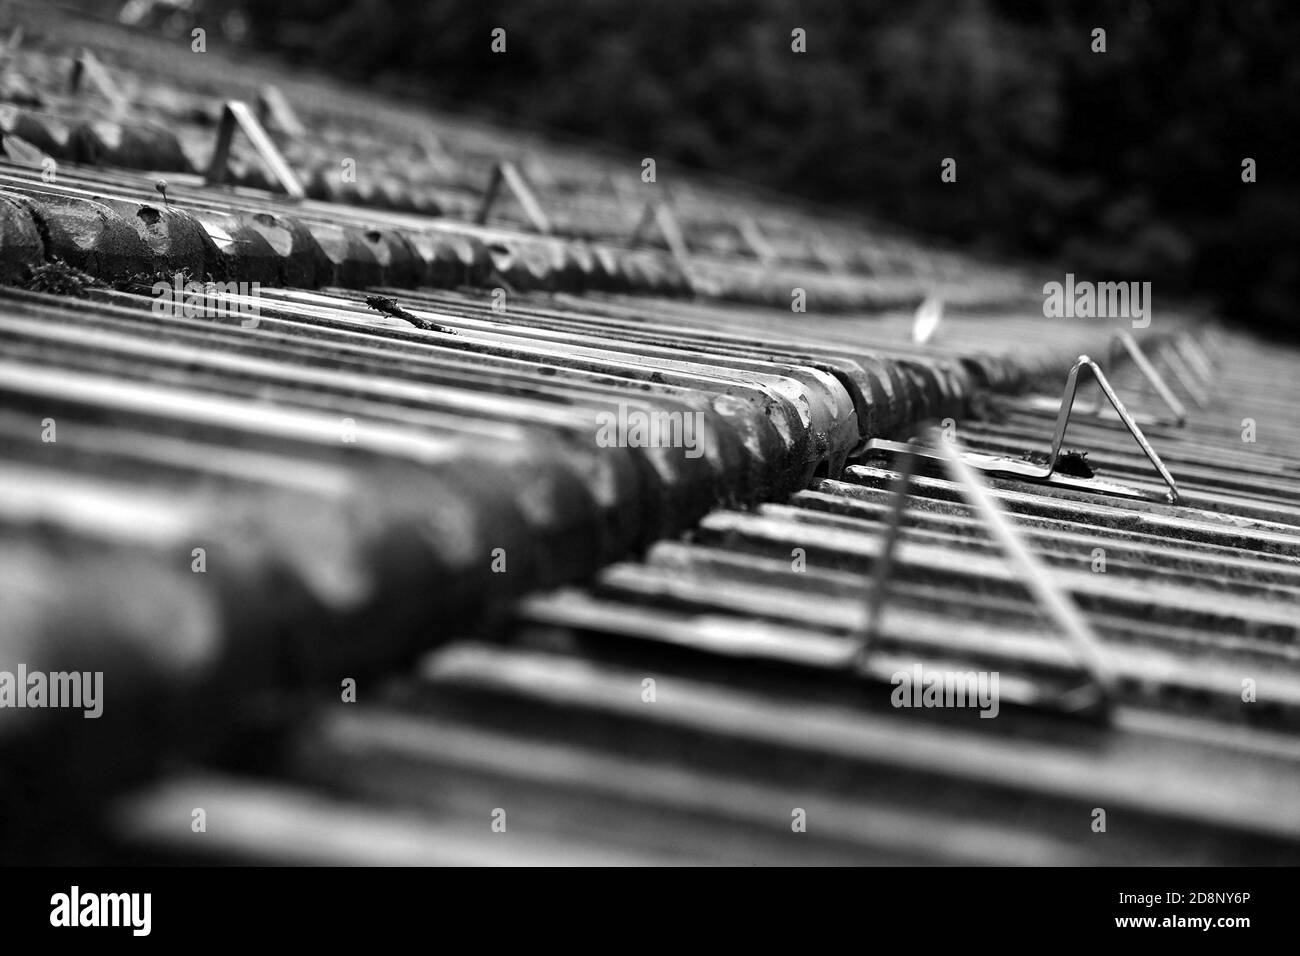 Grayscale shot of a detail of roof tiles with metal brackets Stock Photo